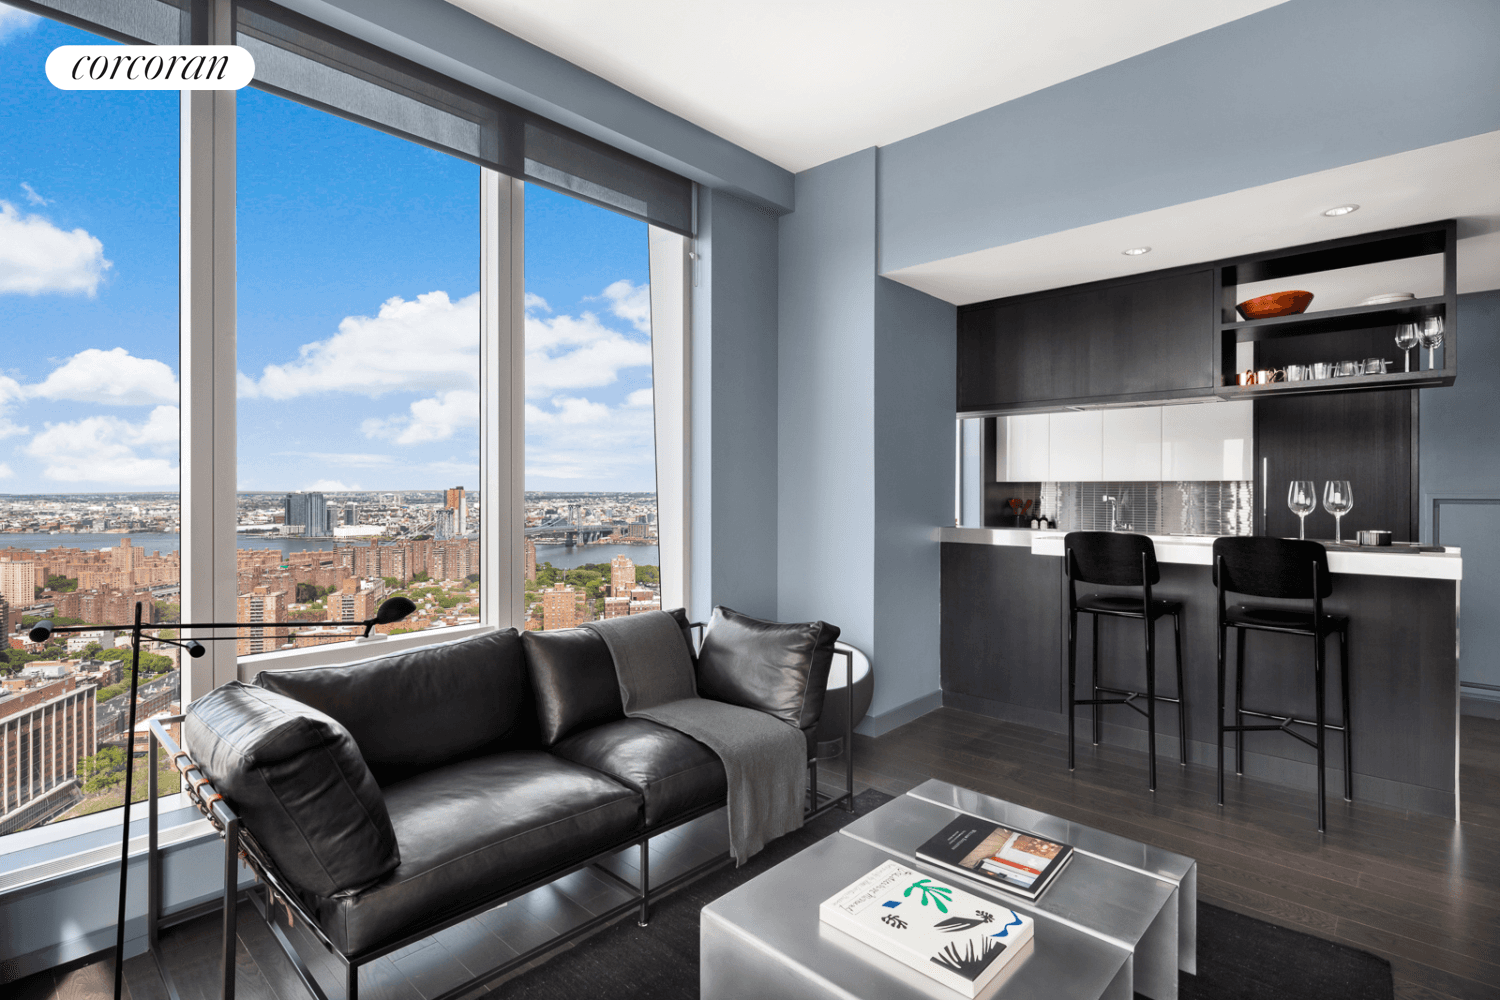 ONE MANHATTAN SQUARE OFFERS ONE OF THE LAST 20 YEAR TAX ABATEMENTS AVAILABLE IN NEW YORK CITYResidence 26L is a 1, 123 square foot two bedroom, two bathroom with an ...